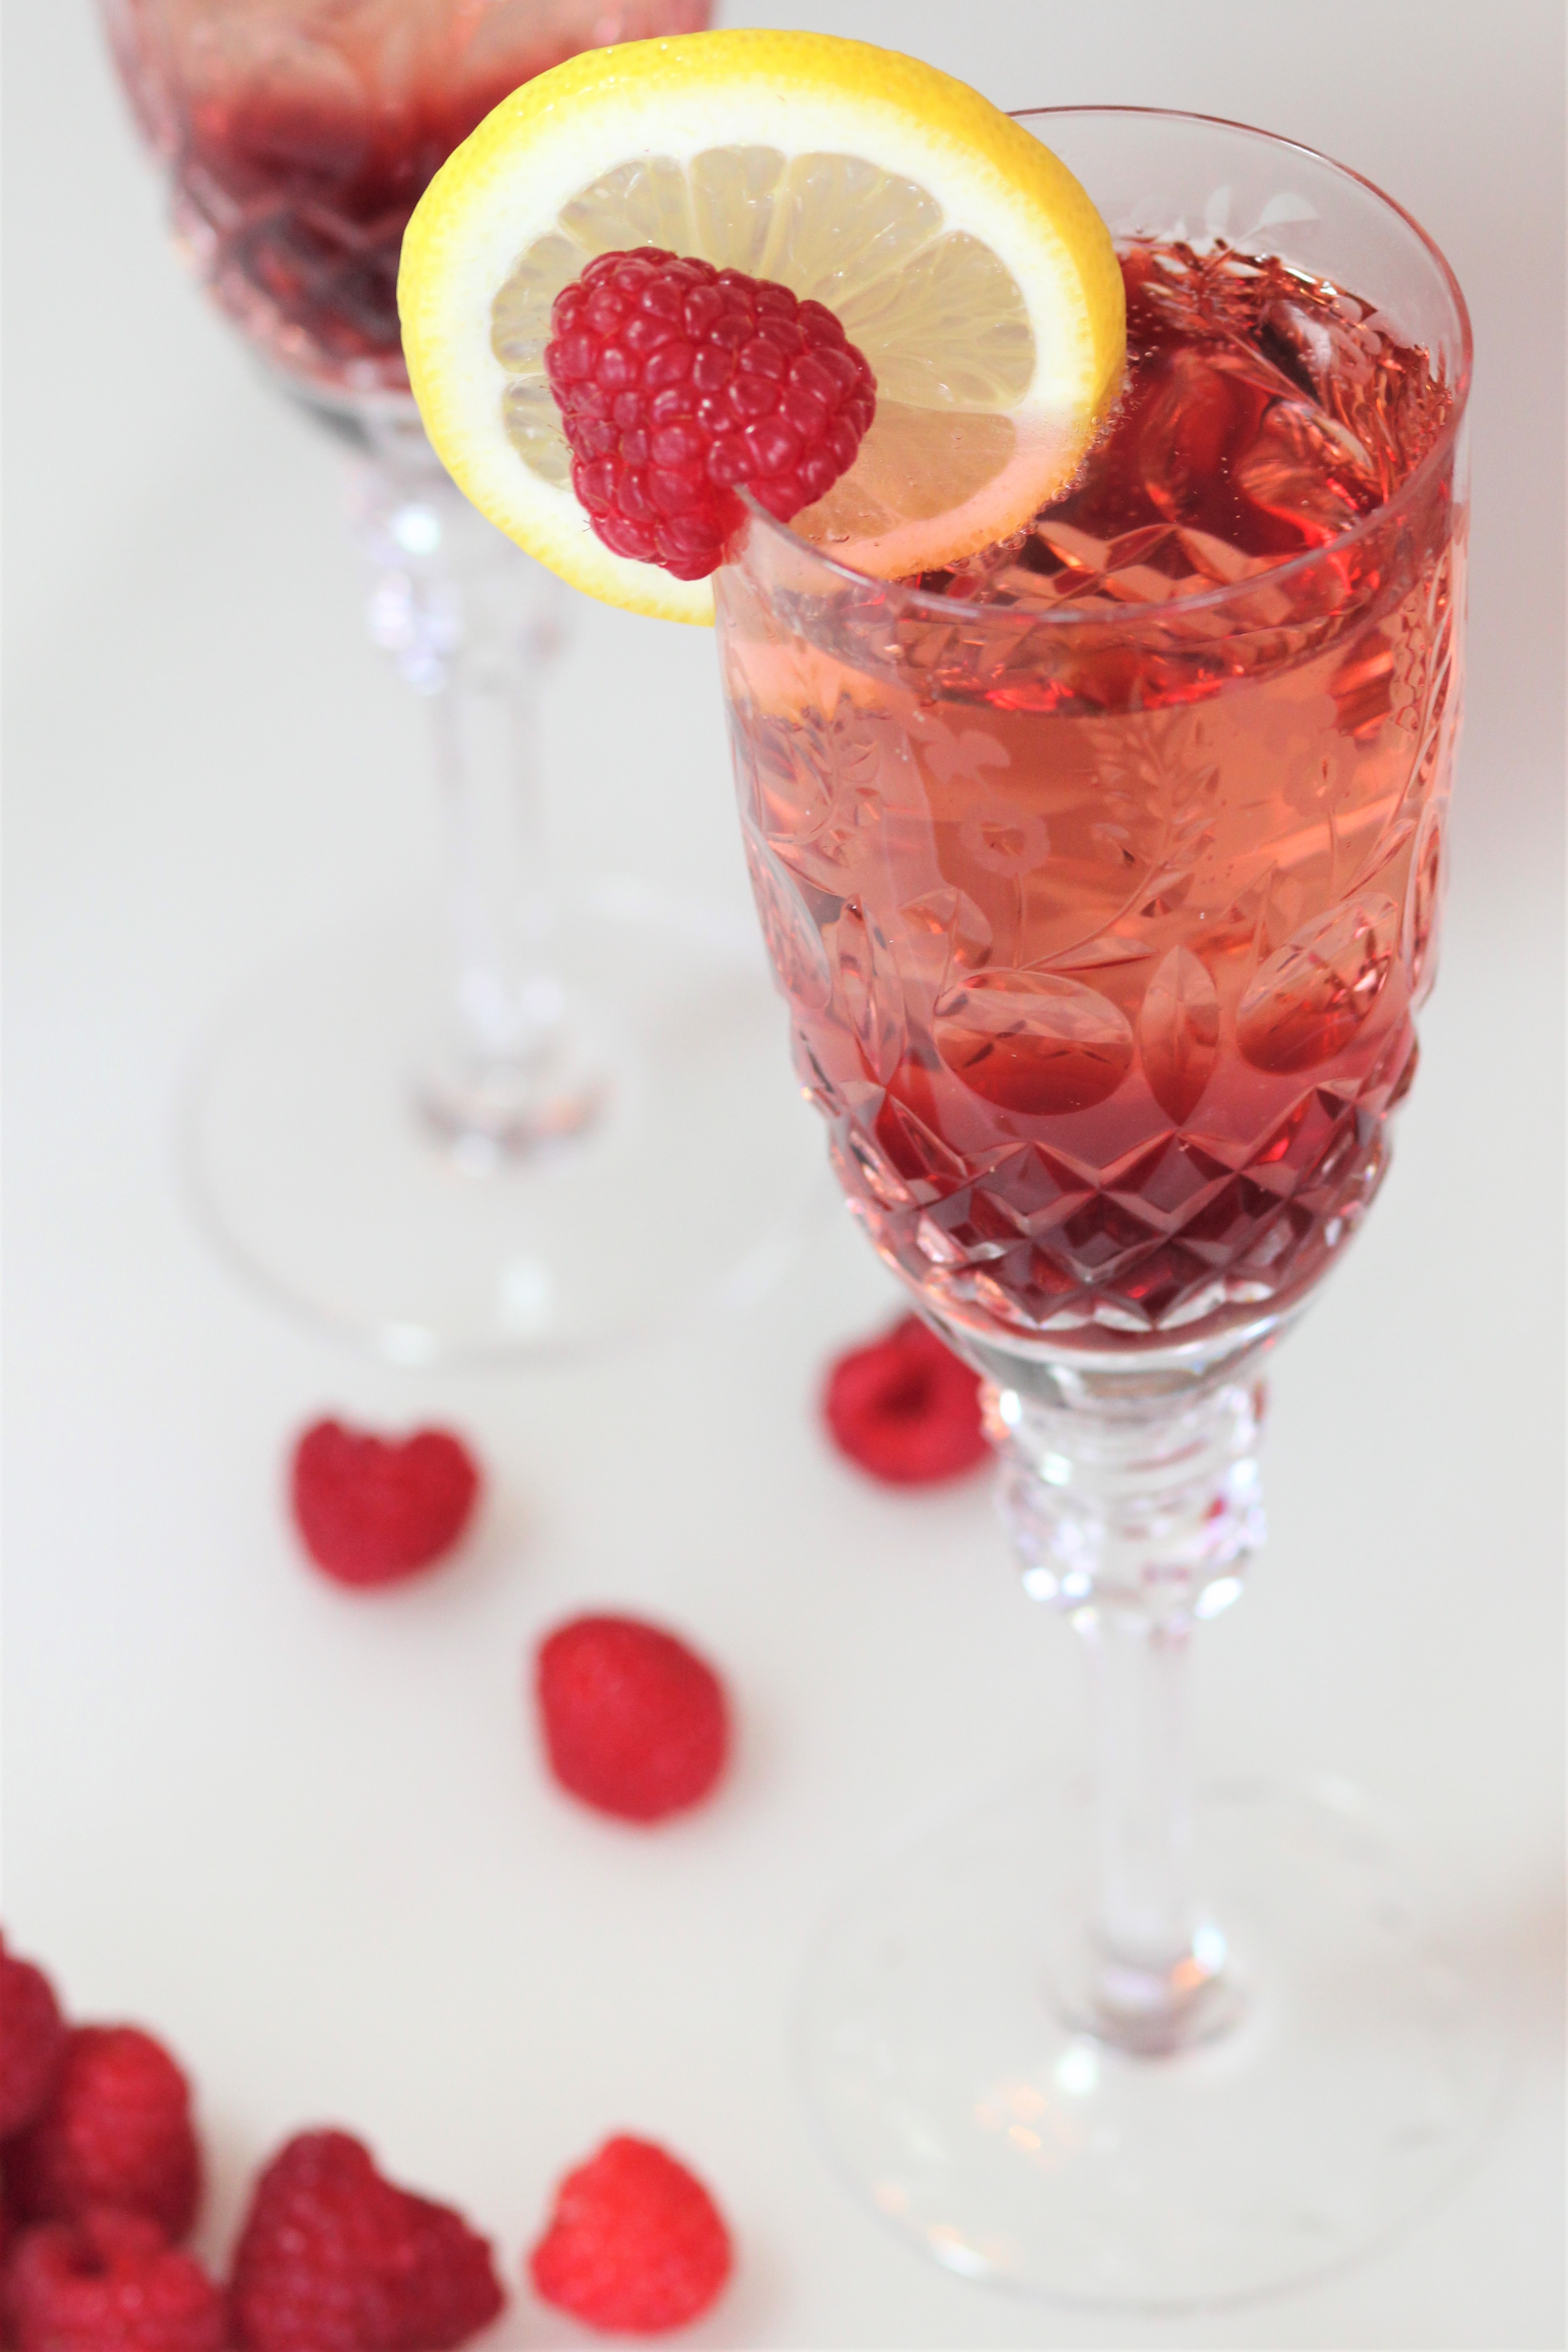 Kir Royale - The Award for Most Beautiful Cocktail Goes To...